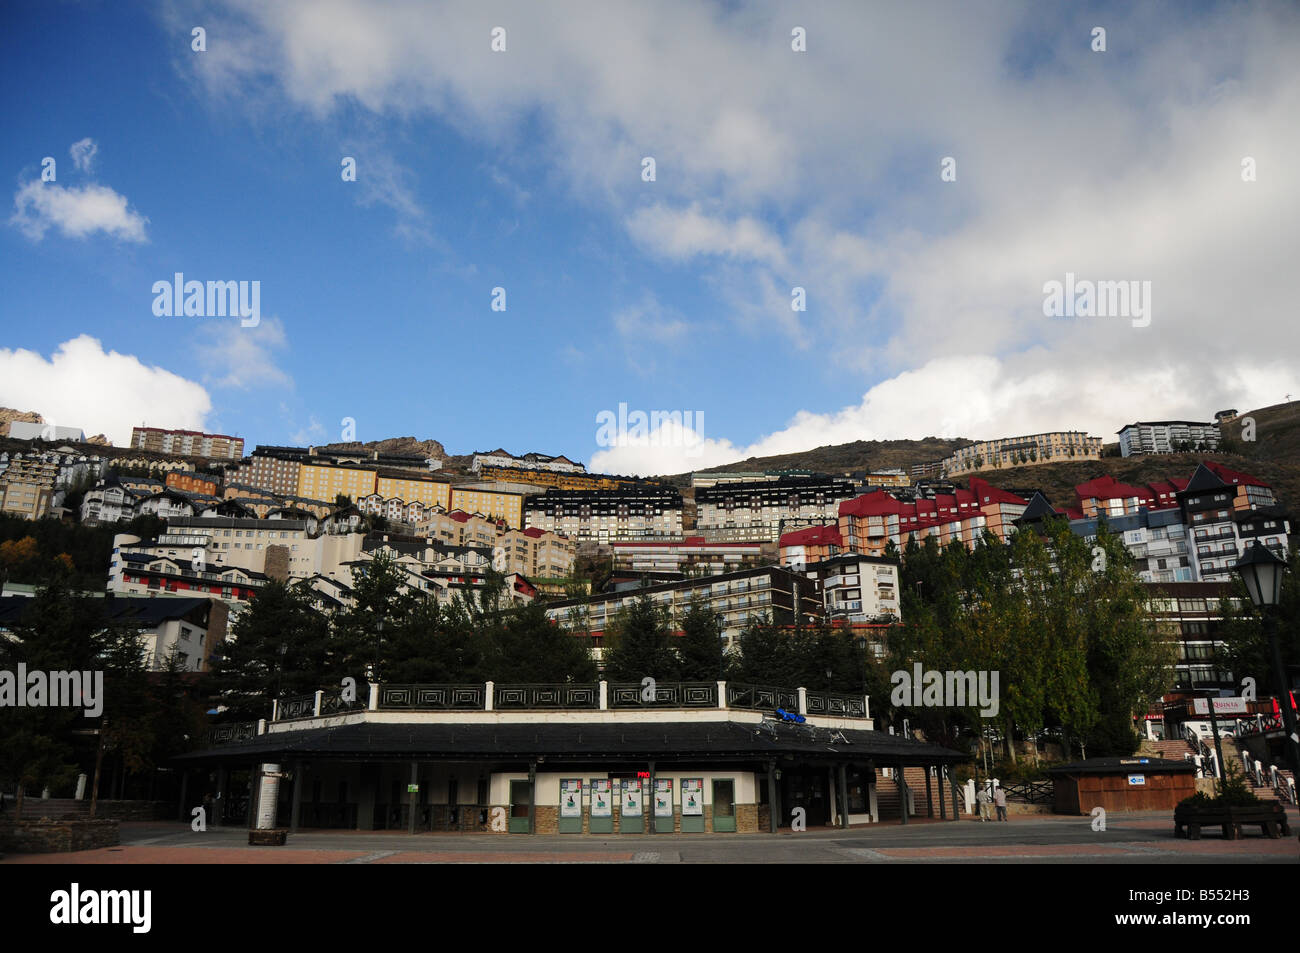 Ski Resort of Sierra Nevada, Andalusia, Spain in Summer (out of ski-season). Hotels, chalets and lodges rising above the square. Stock Photo